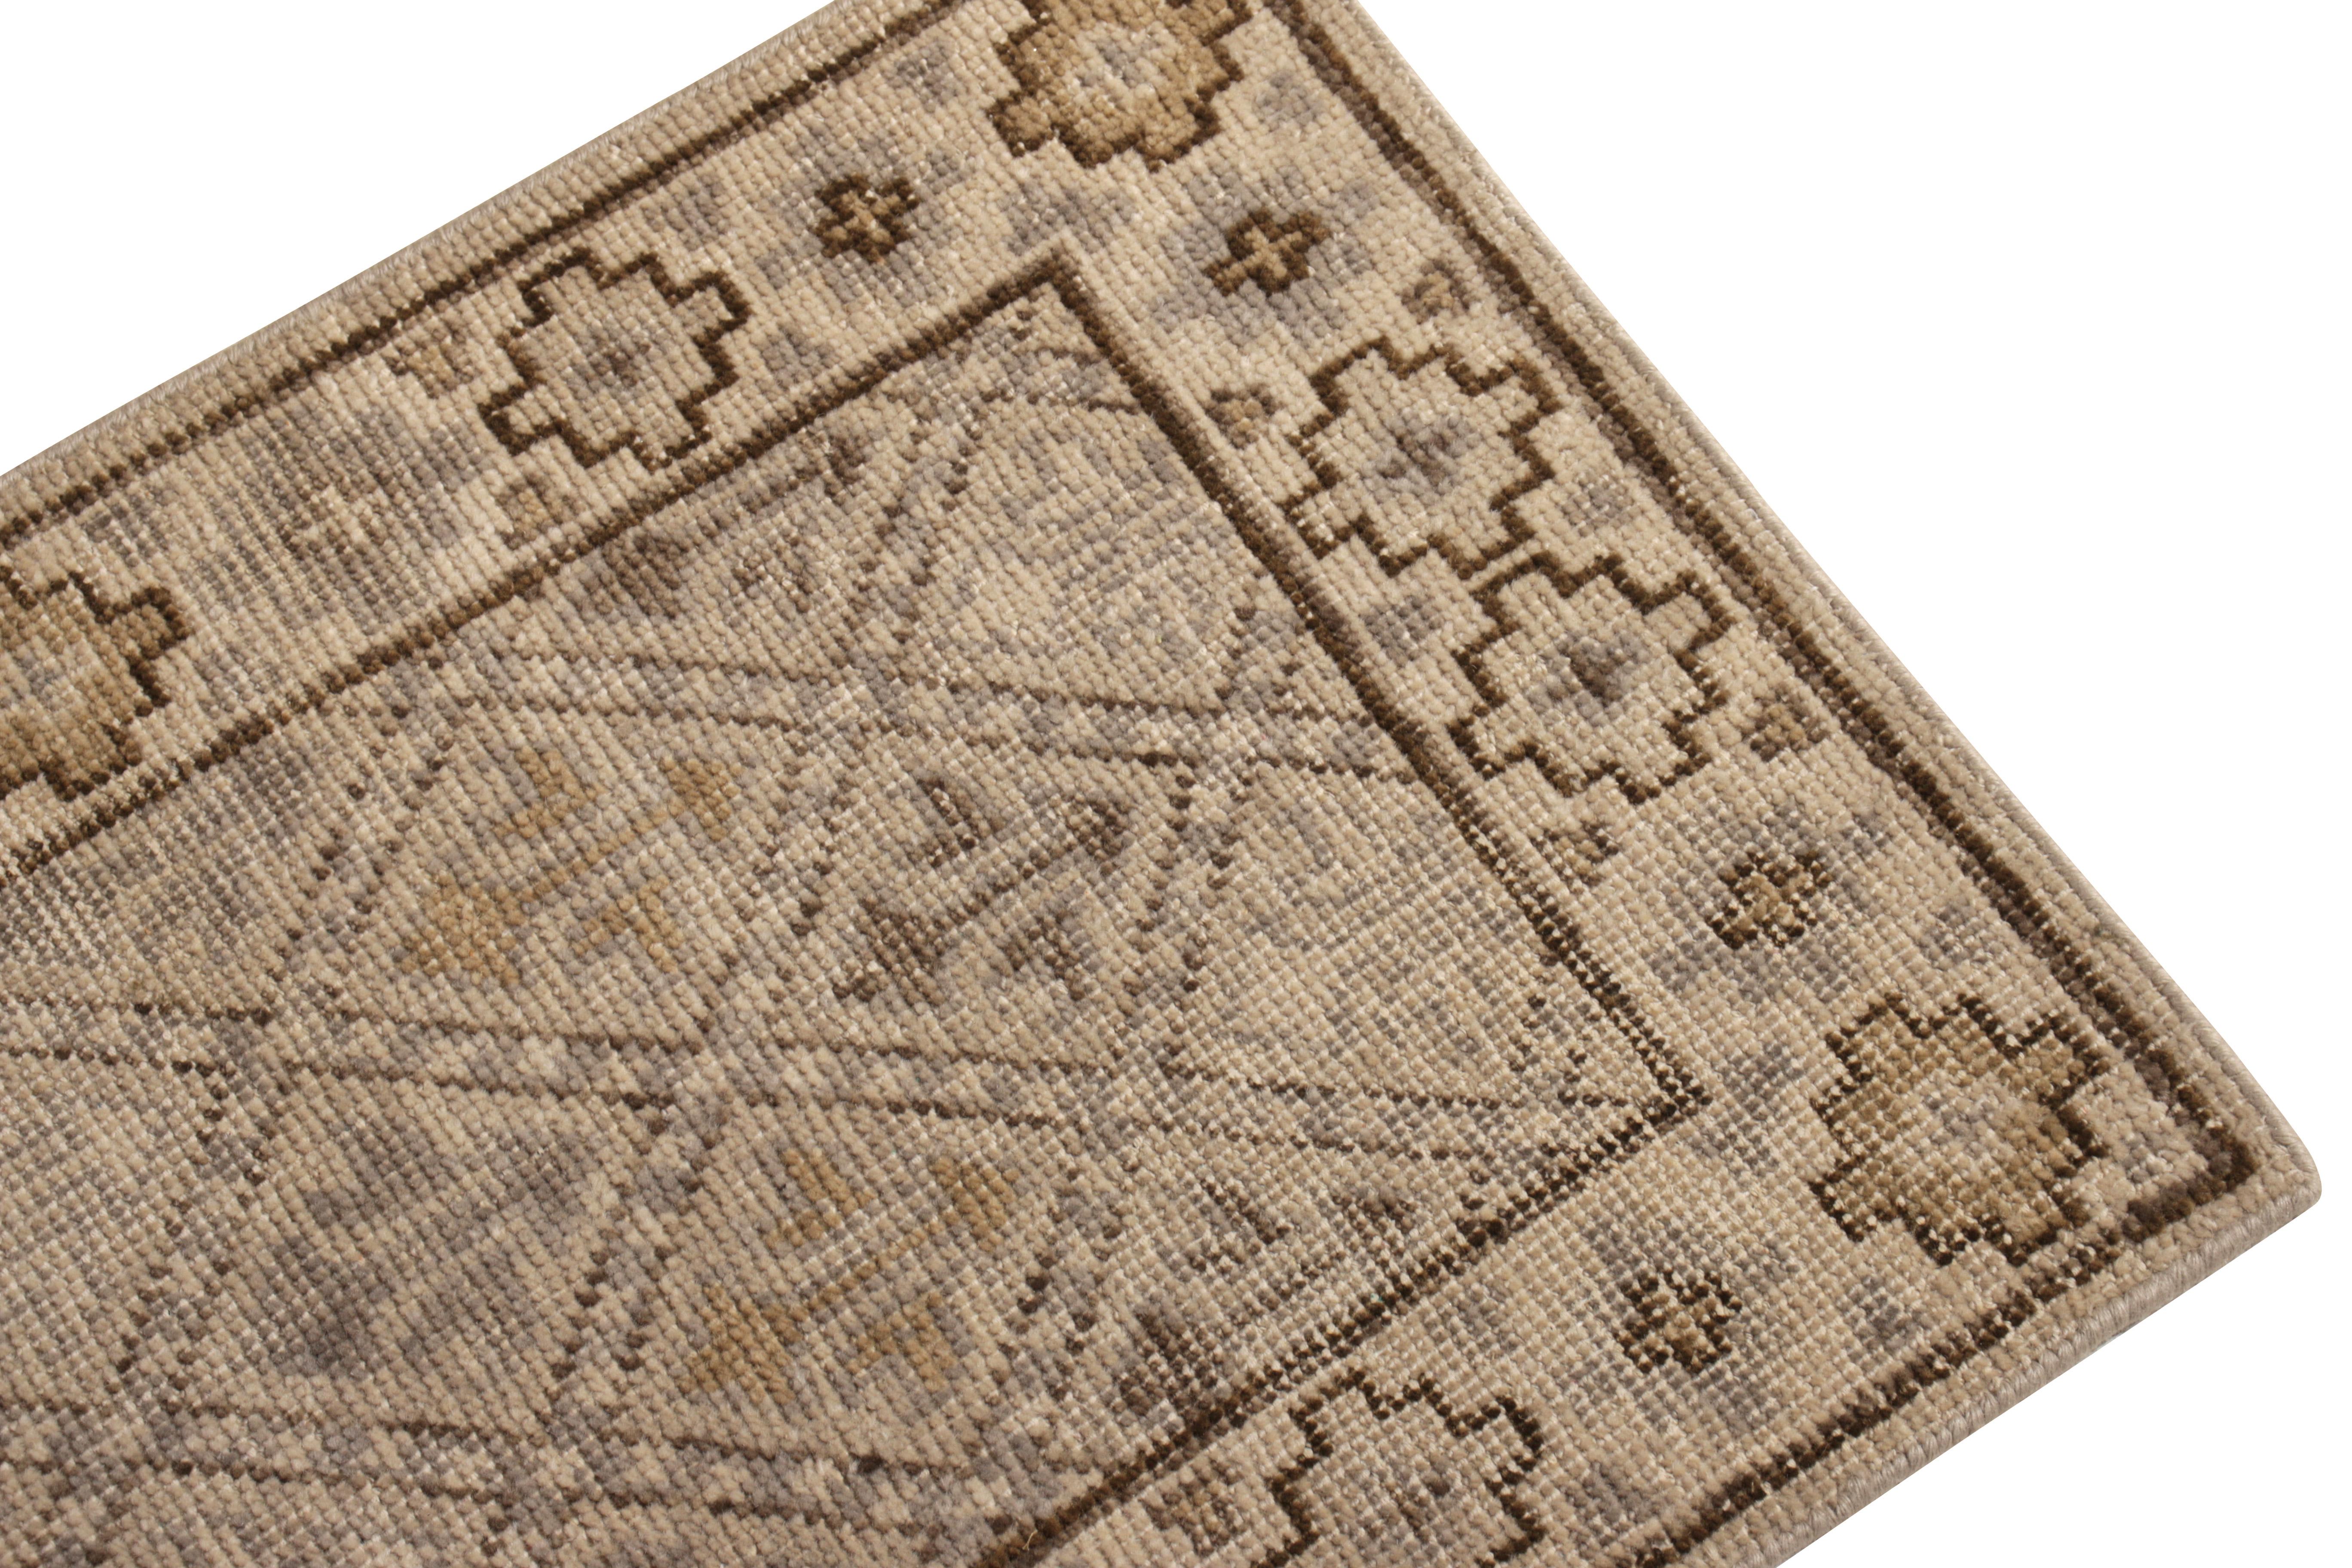 Handmade in a refined, low-pile wool with a comfortable wash achieving this shabby-chic distressed style, this gift sized 2 x 3 rug hails from the Homage collection by Rug & Kilim; both well-suited for wall hanging, doormat, and varied entryway